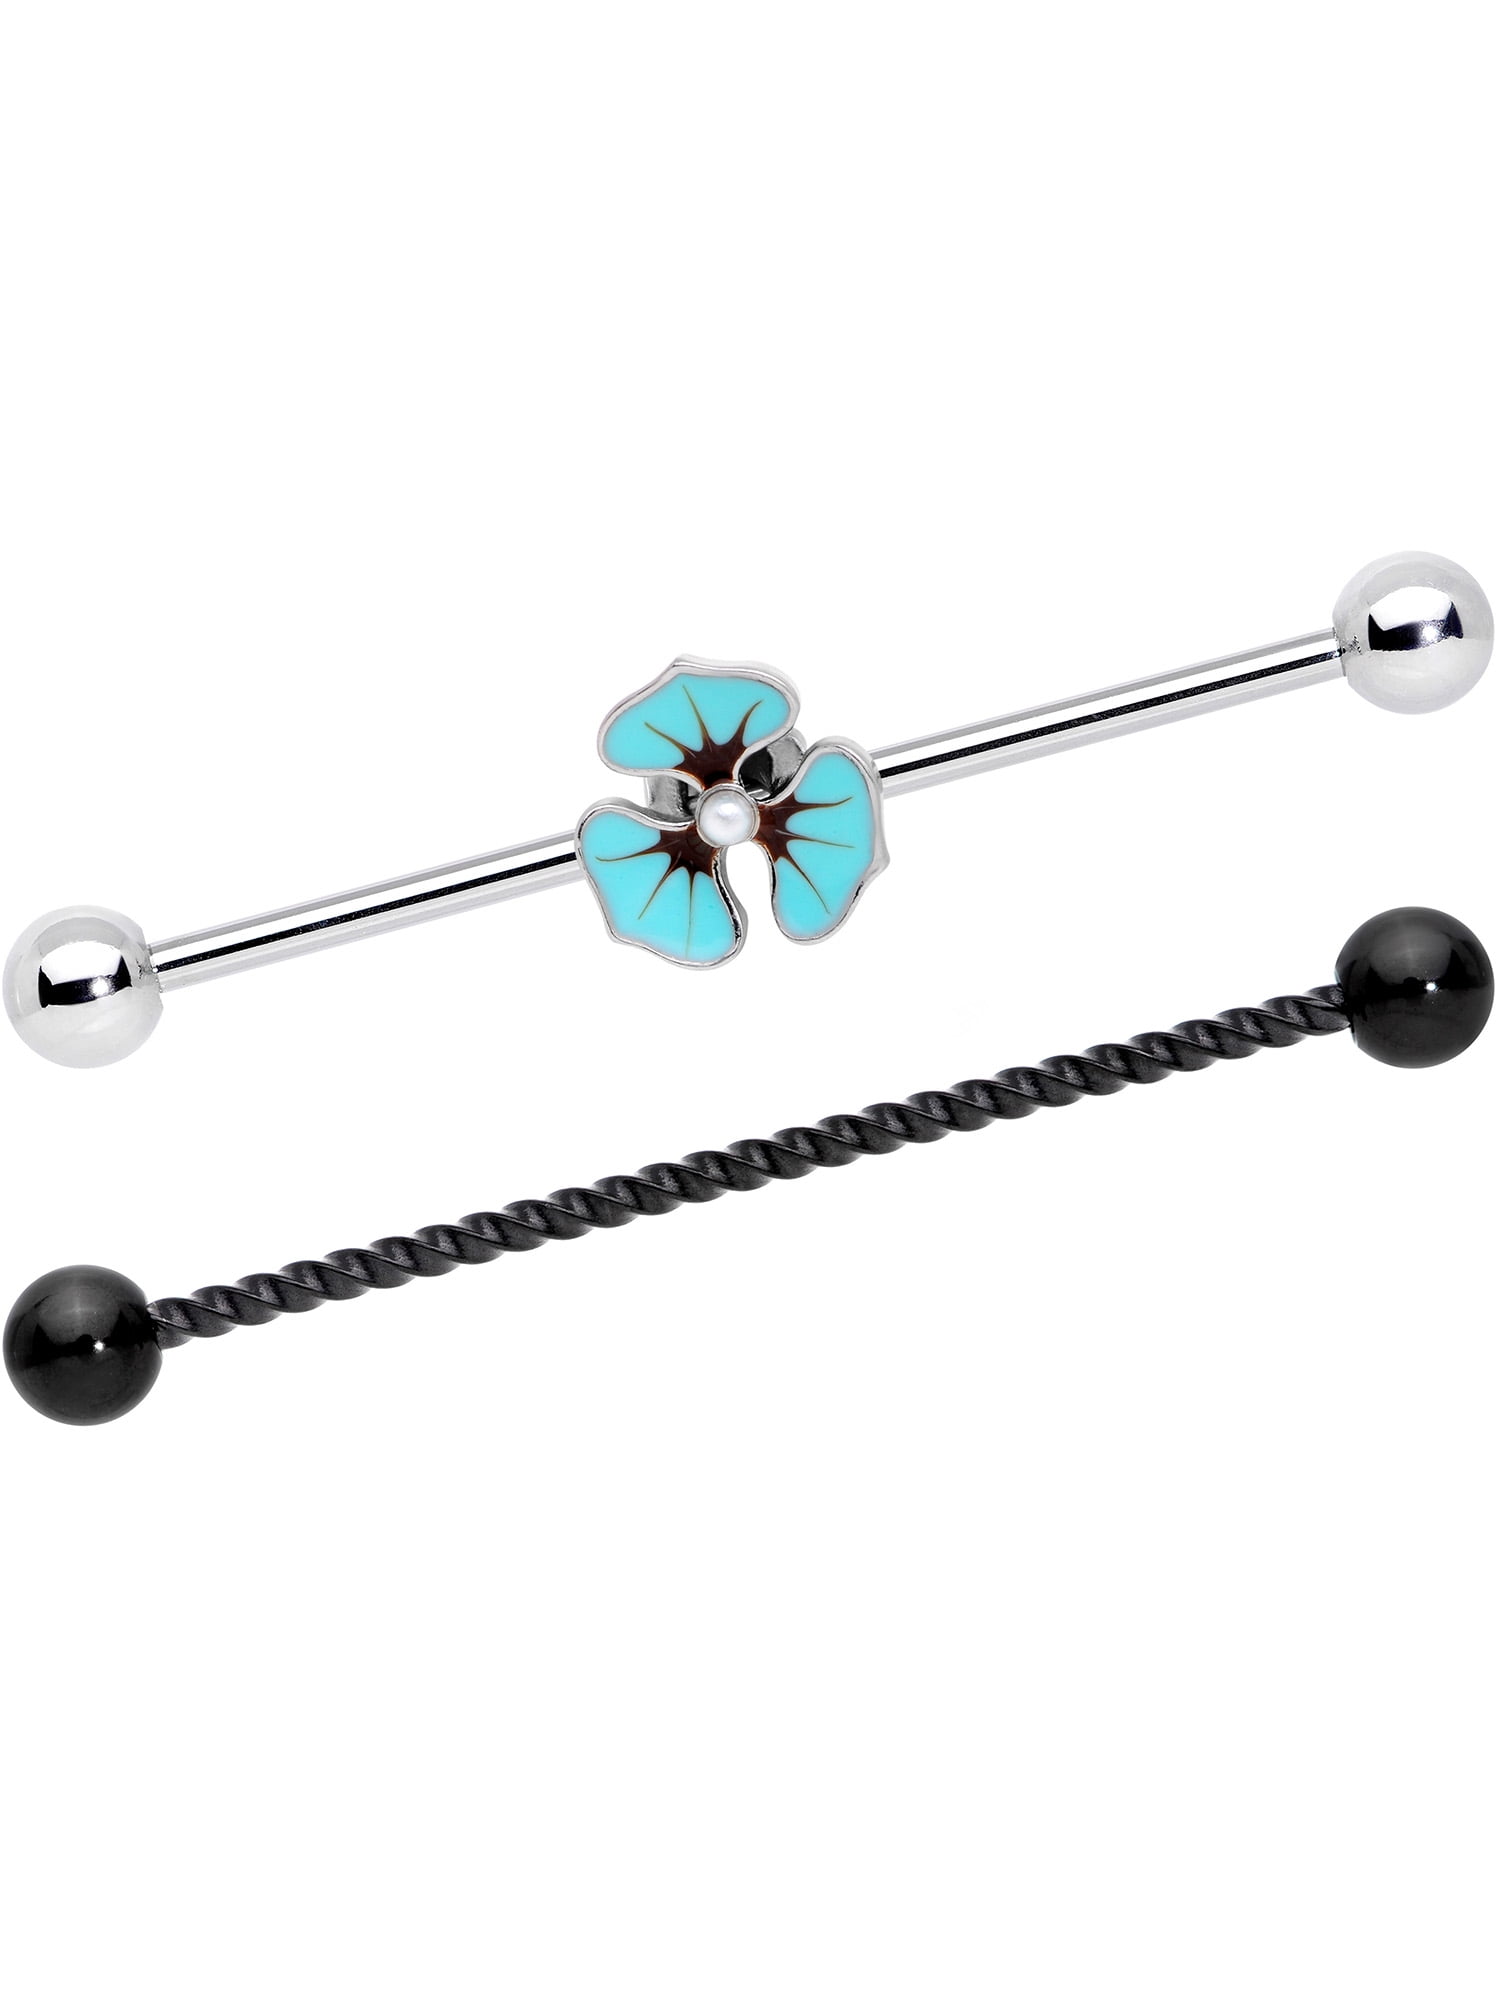 Body Candy Stainless Steel Brilliant Blue Accent Windmill Flower Industrial Barbell 14 Gauge 38mm